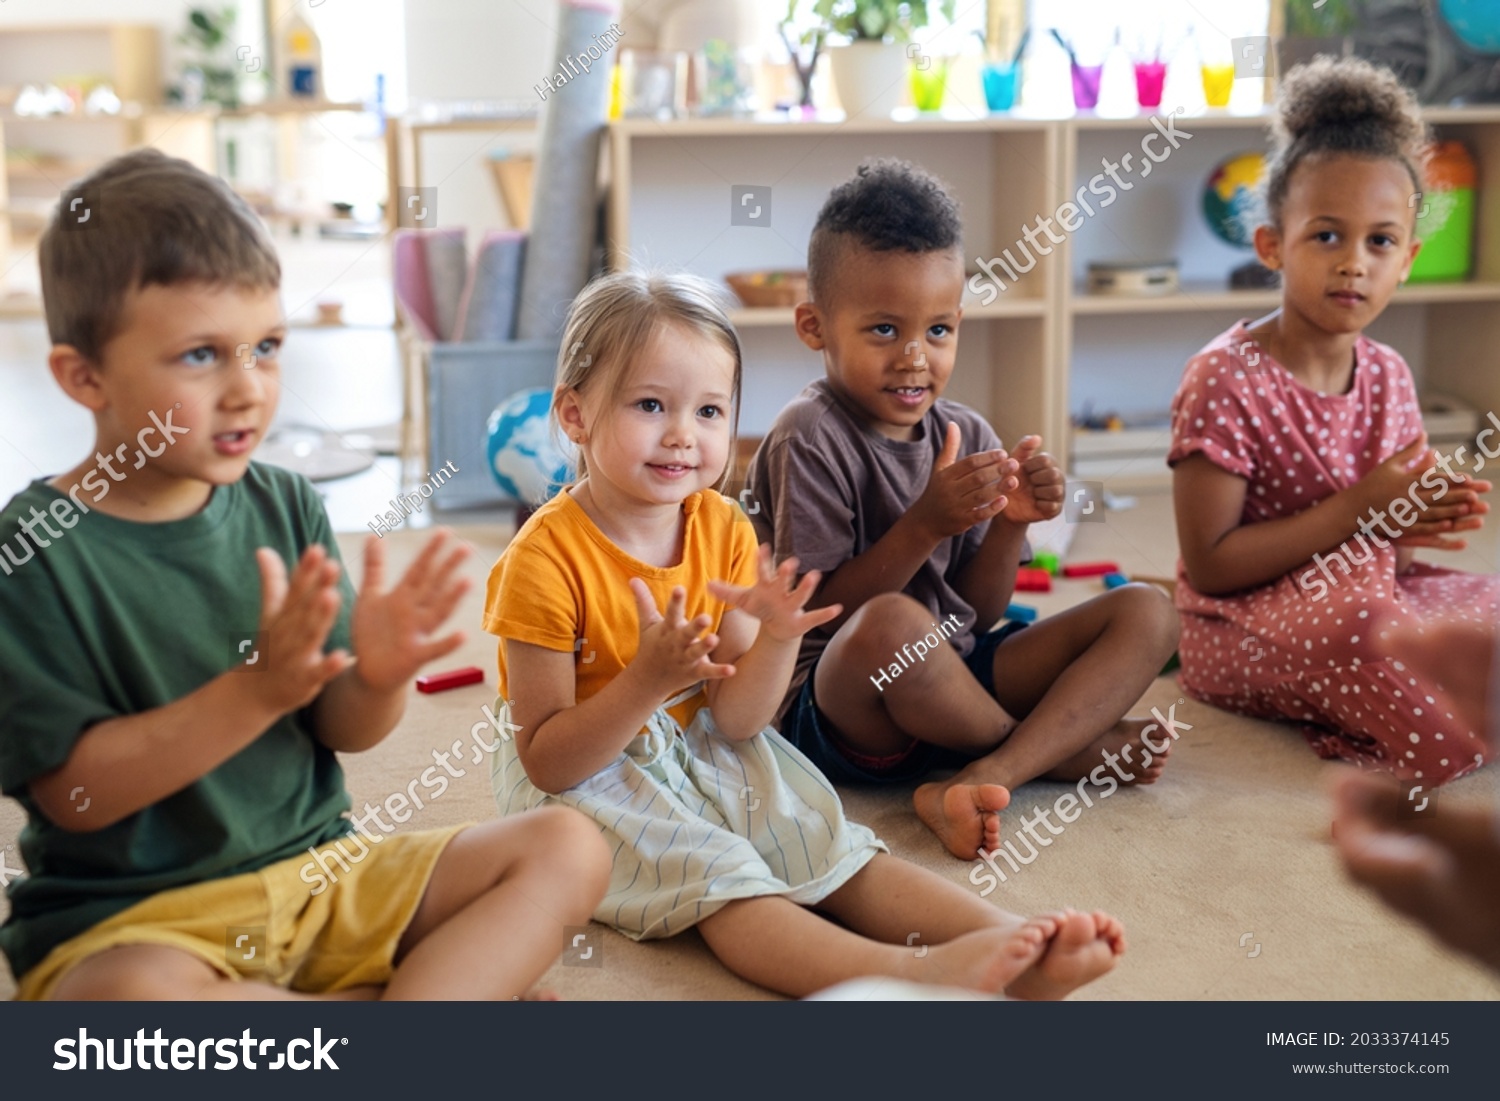 Group of small nursery school children sitting on floor indoors in classroom, clapping. #2033374145